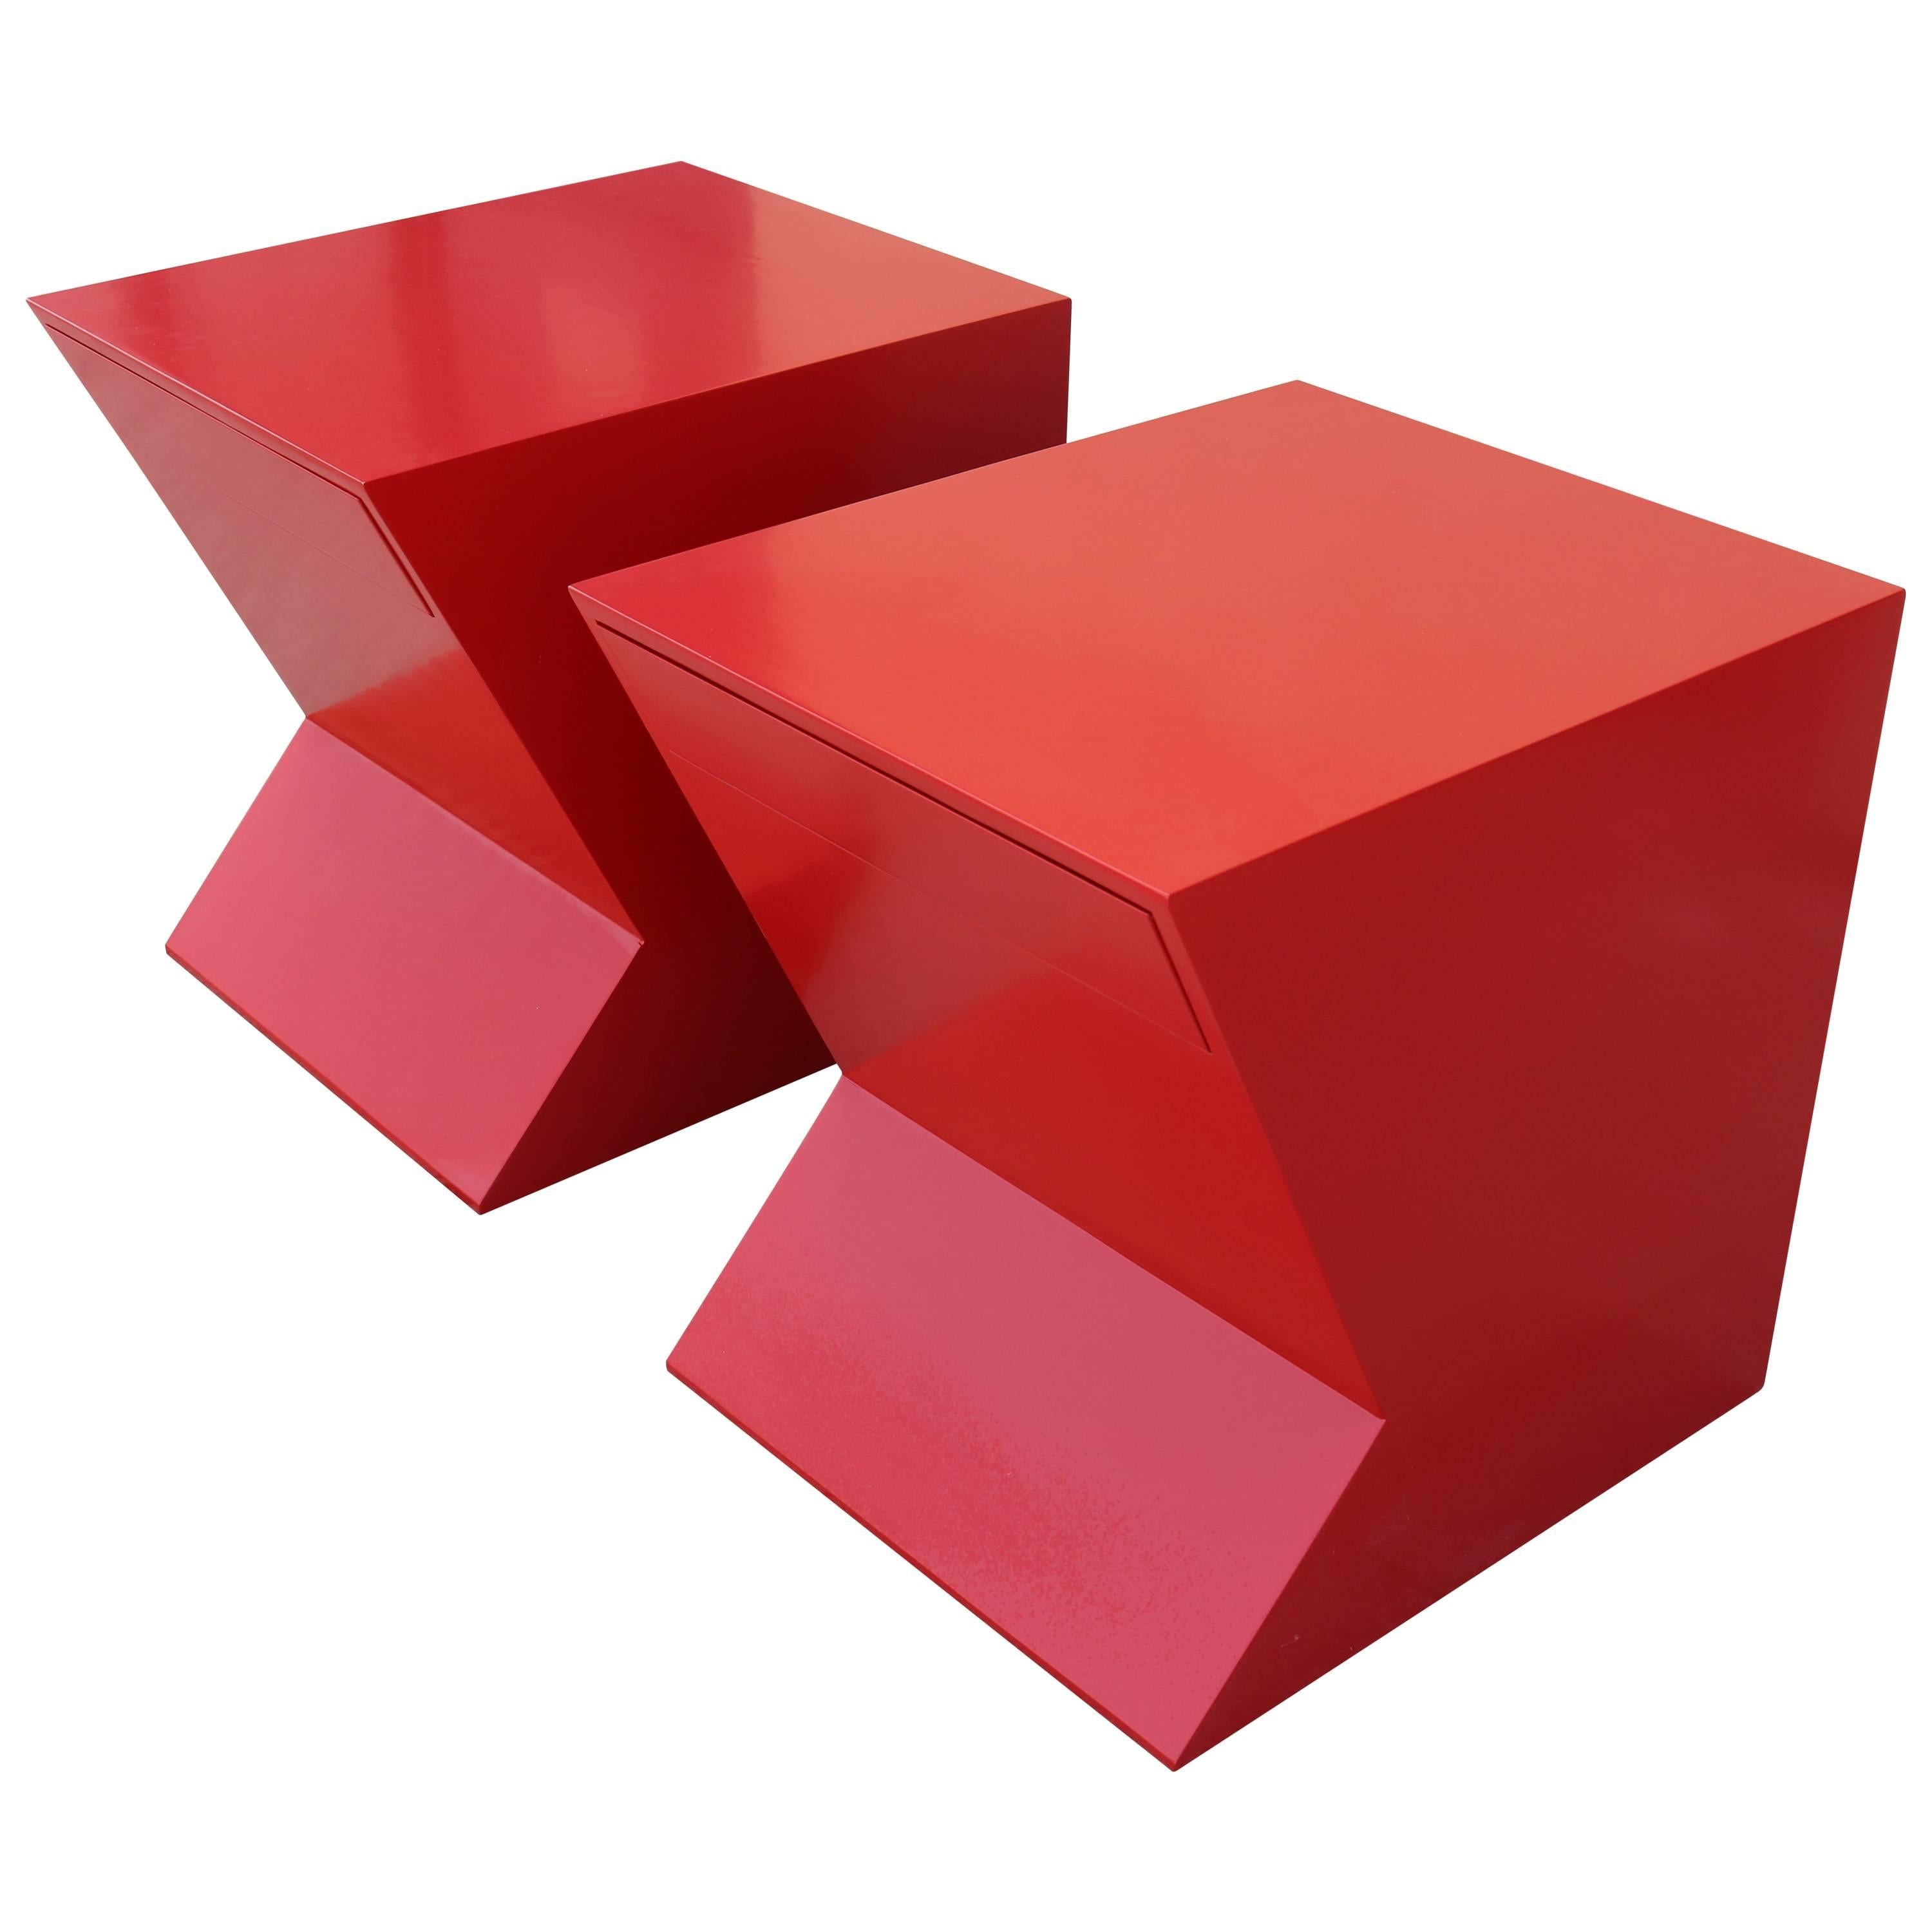 Architectural Cherry Red Lacquer Geometric Shaped Nightstands, Pair